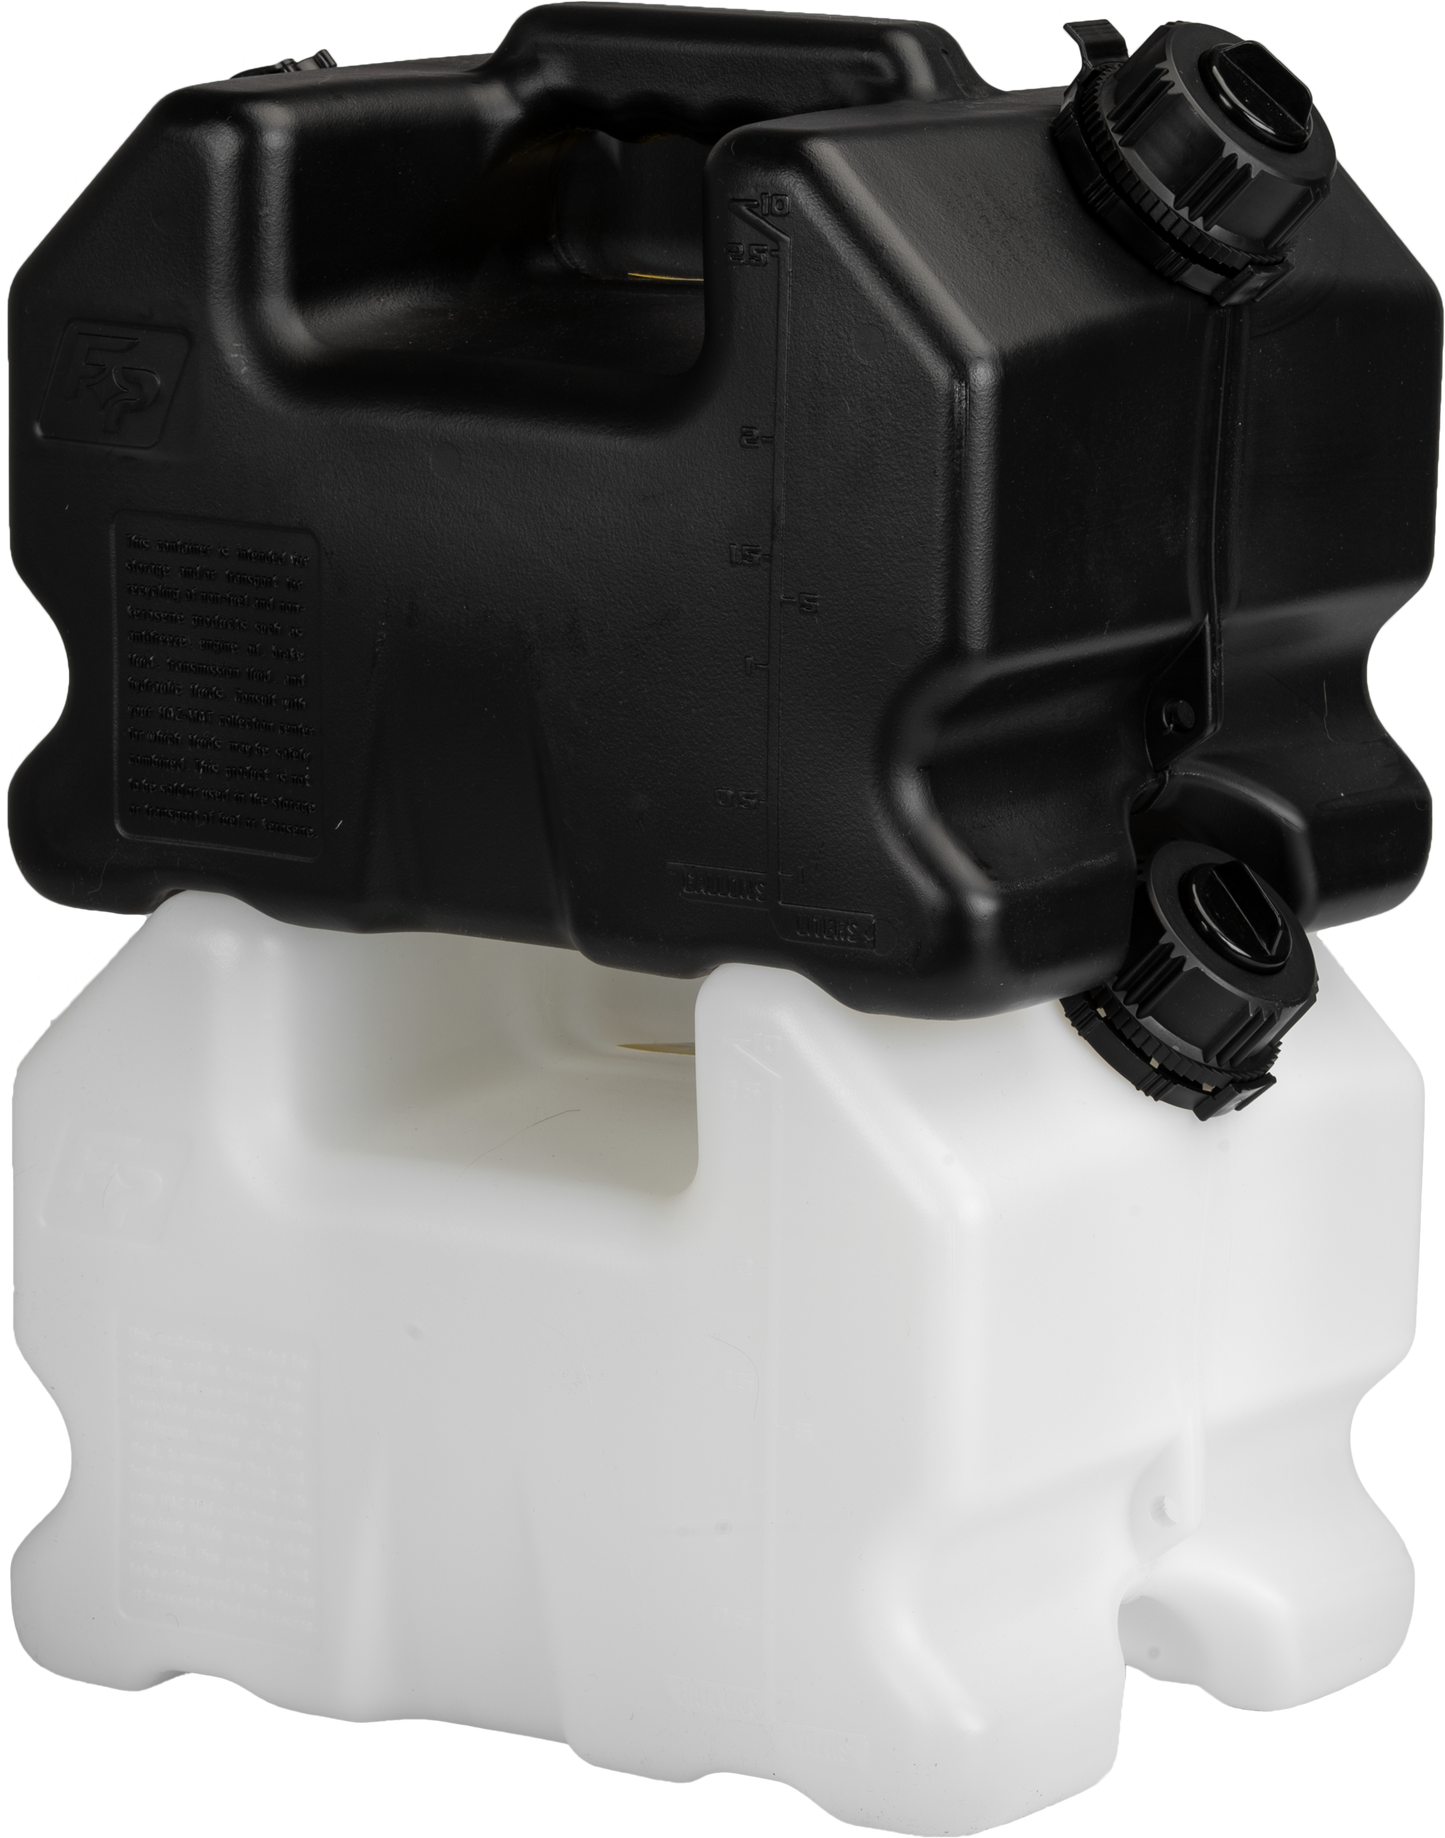 Fire Power Stackable Fuel Container 2.5 Gallon Black